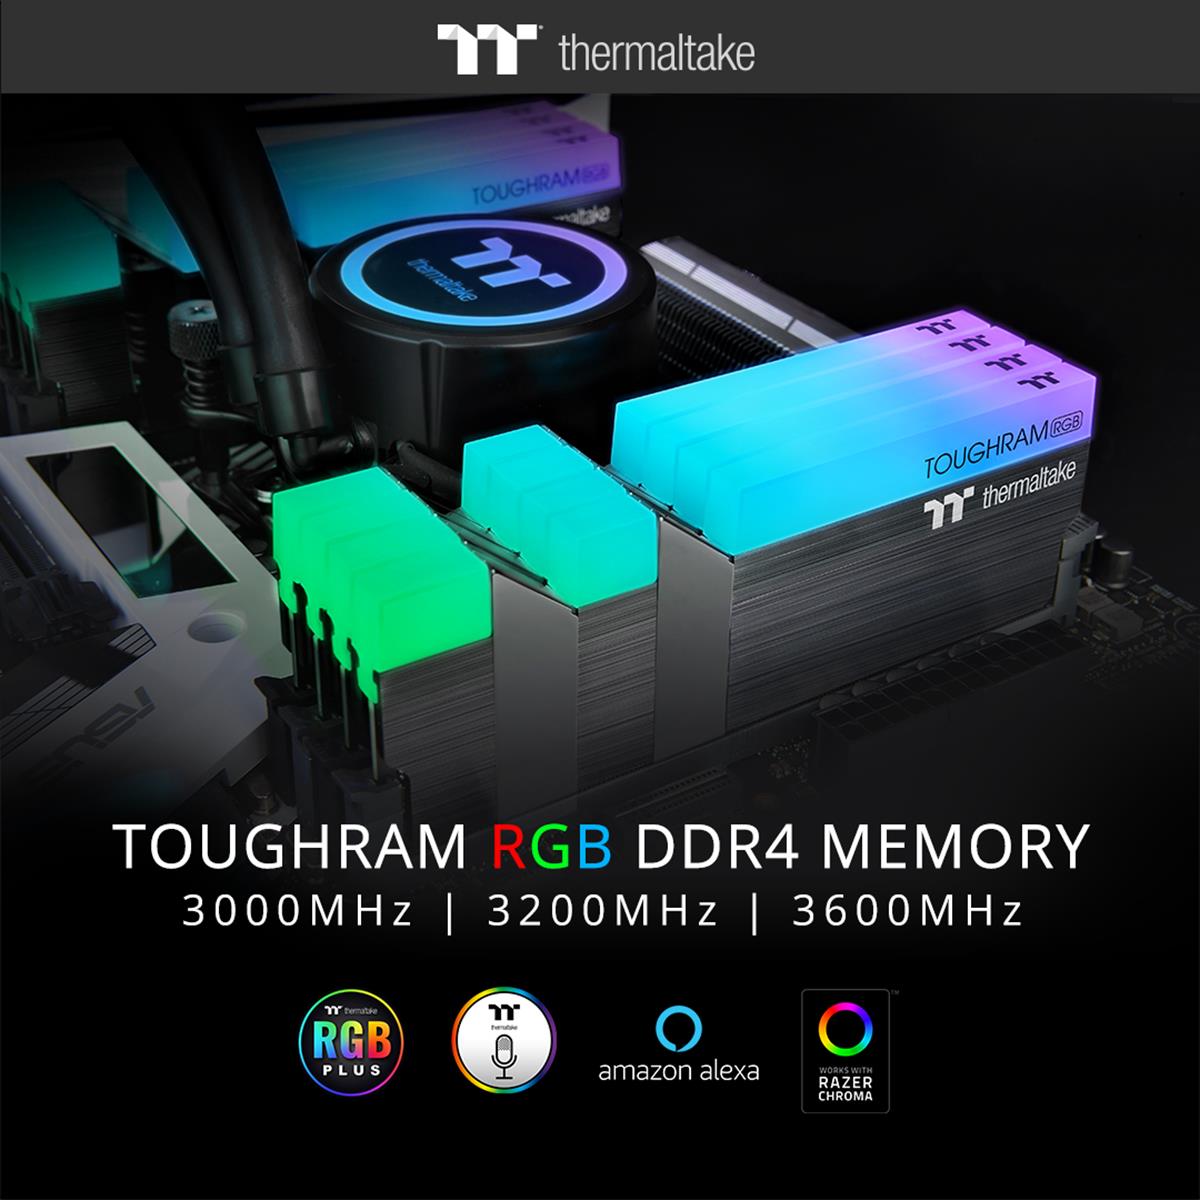 Thermaltake Launches TOUGHRAM RGB DDR4 Memory Series